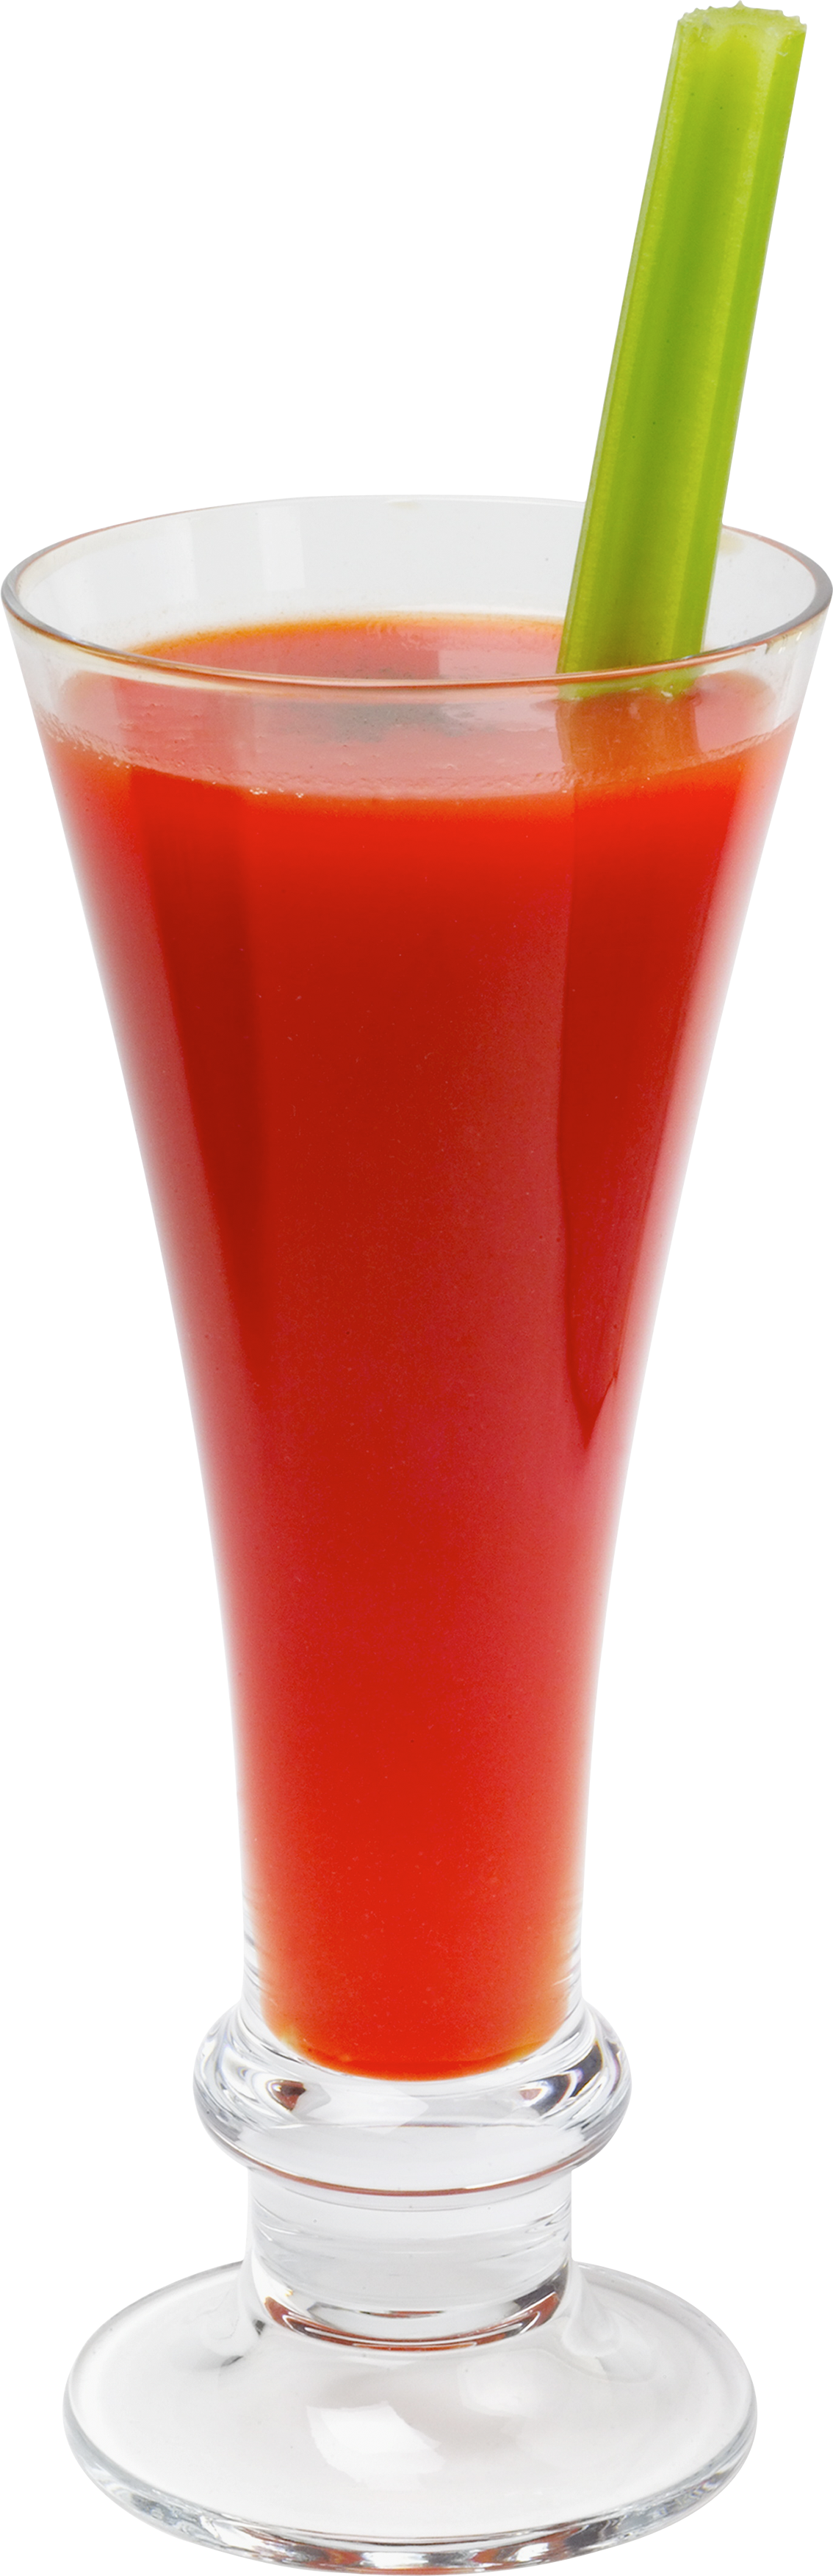 Glass Of Juice PNG - 51861